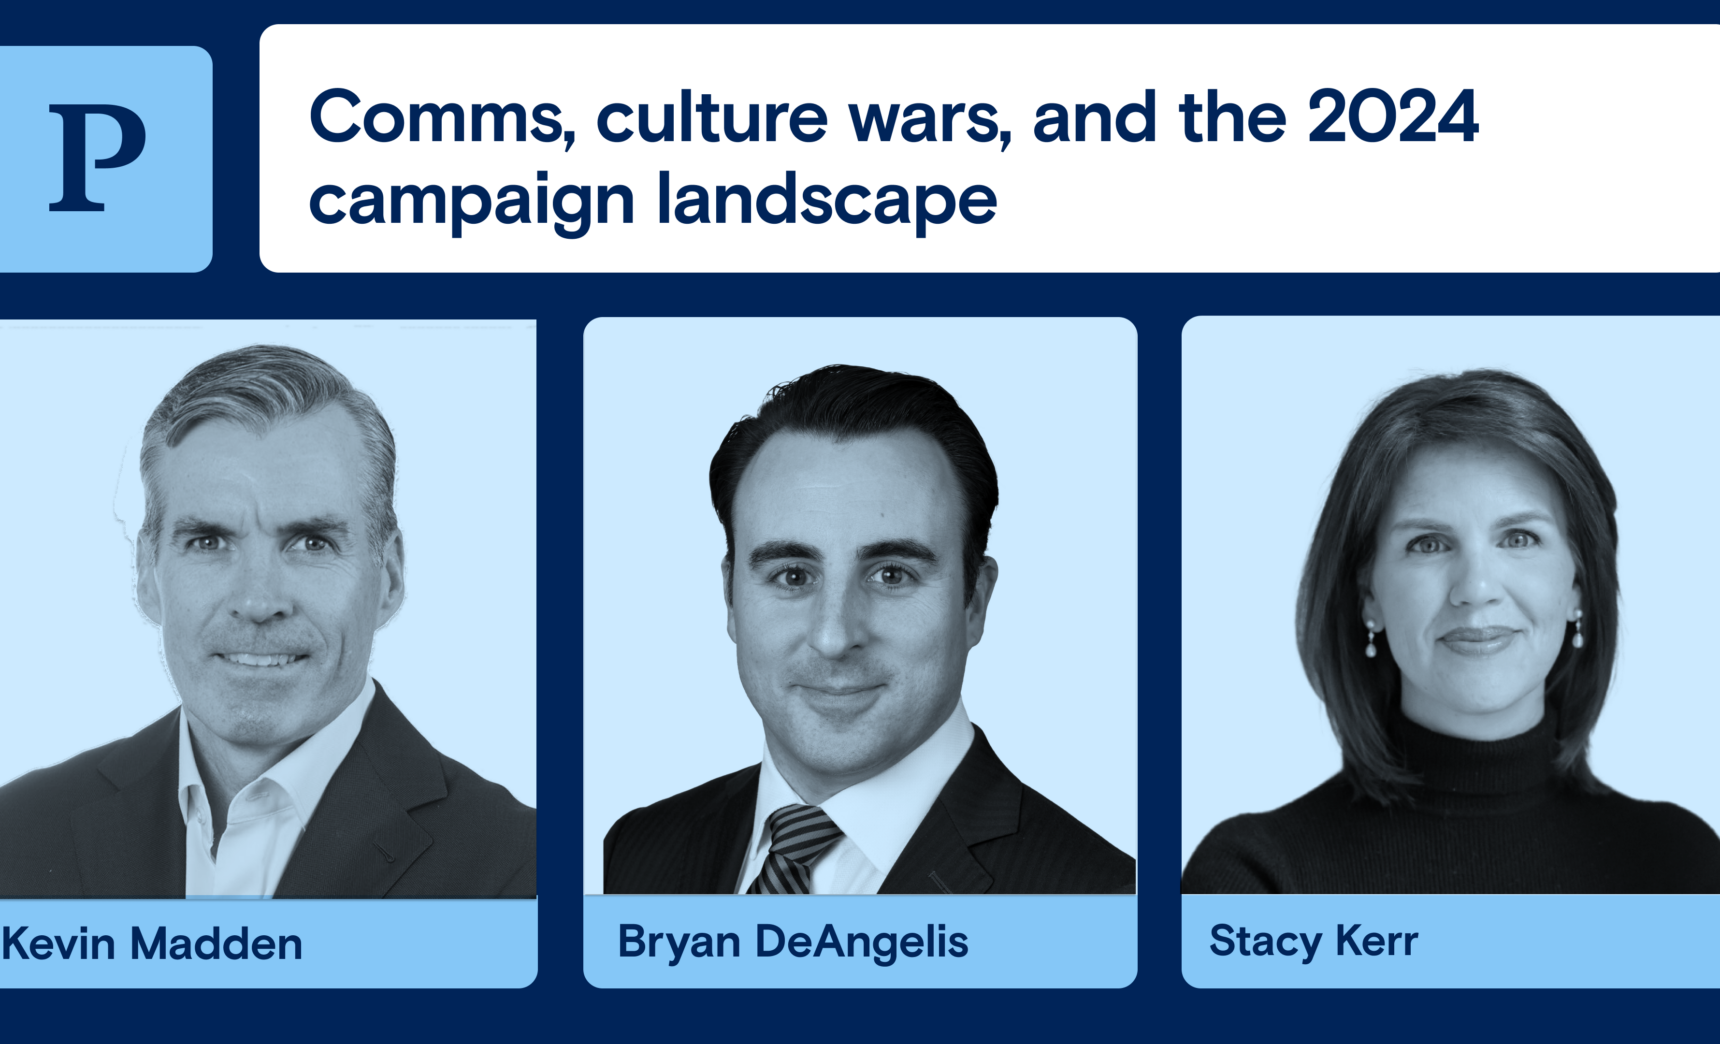 Comms, culture wars, and the 2024 campaign landscape